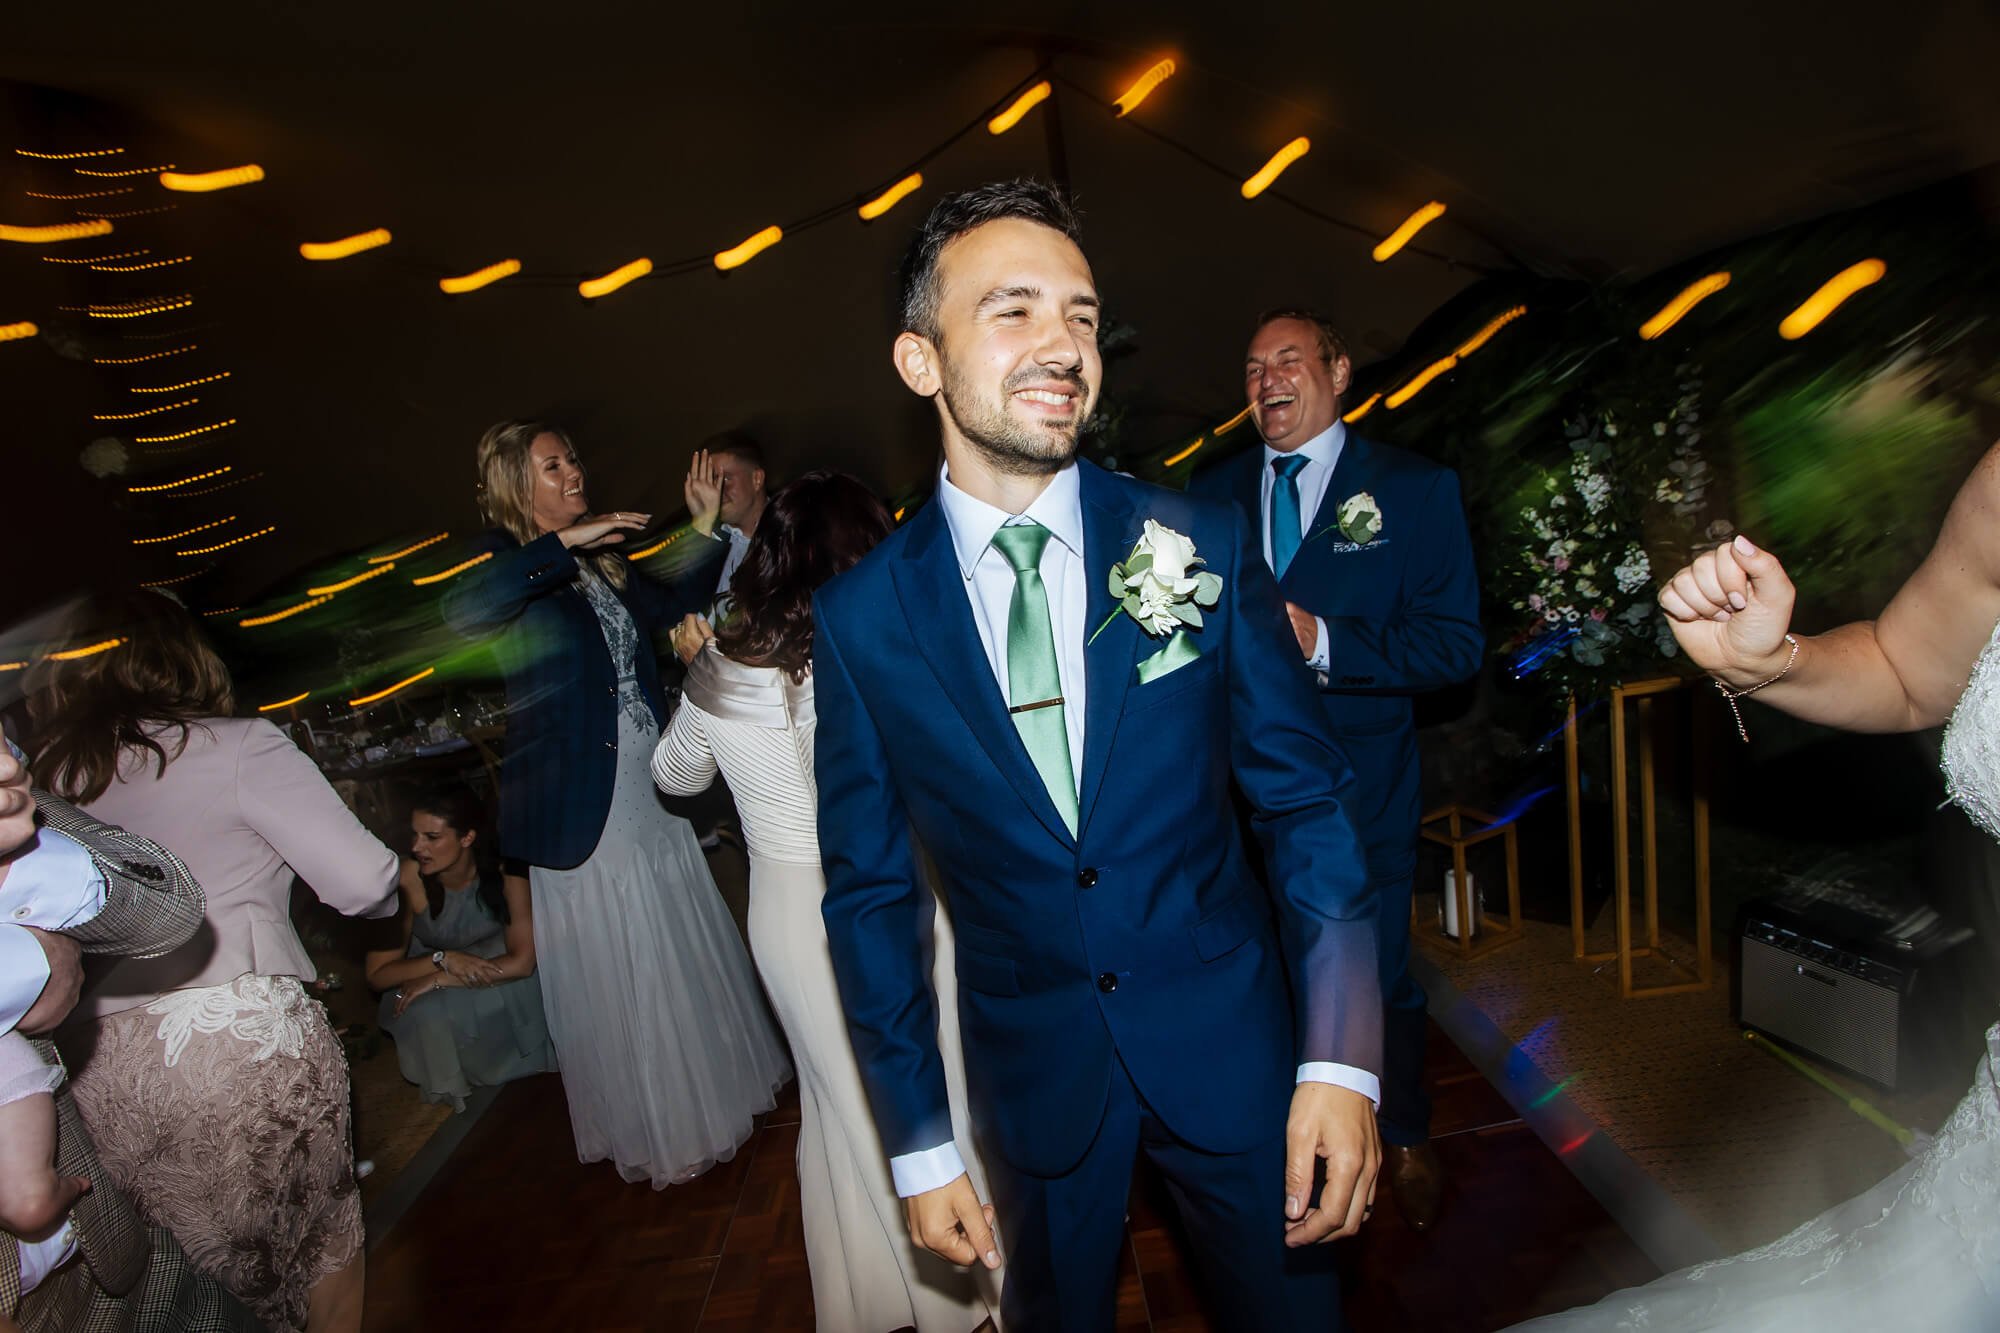 Groom smiling on the dance floor at his wedding